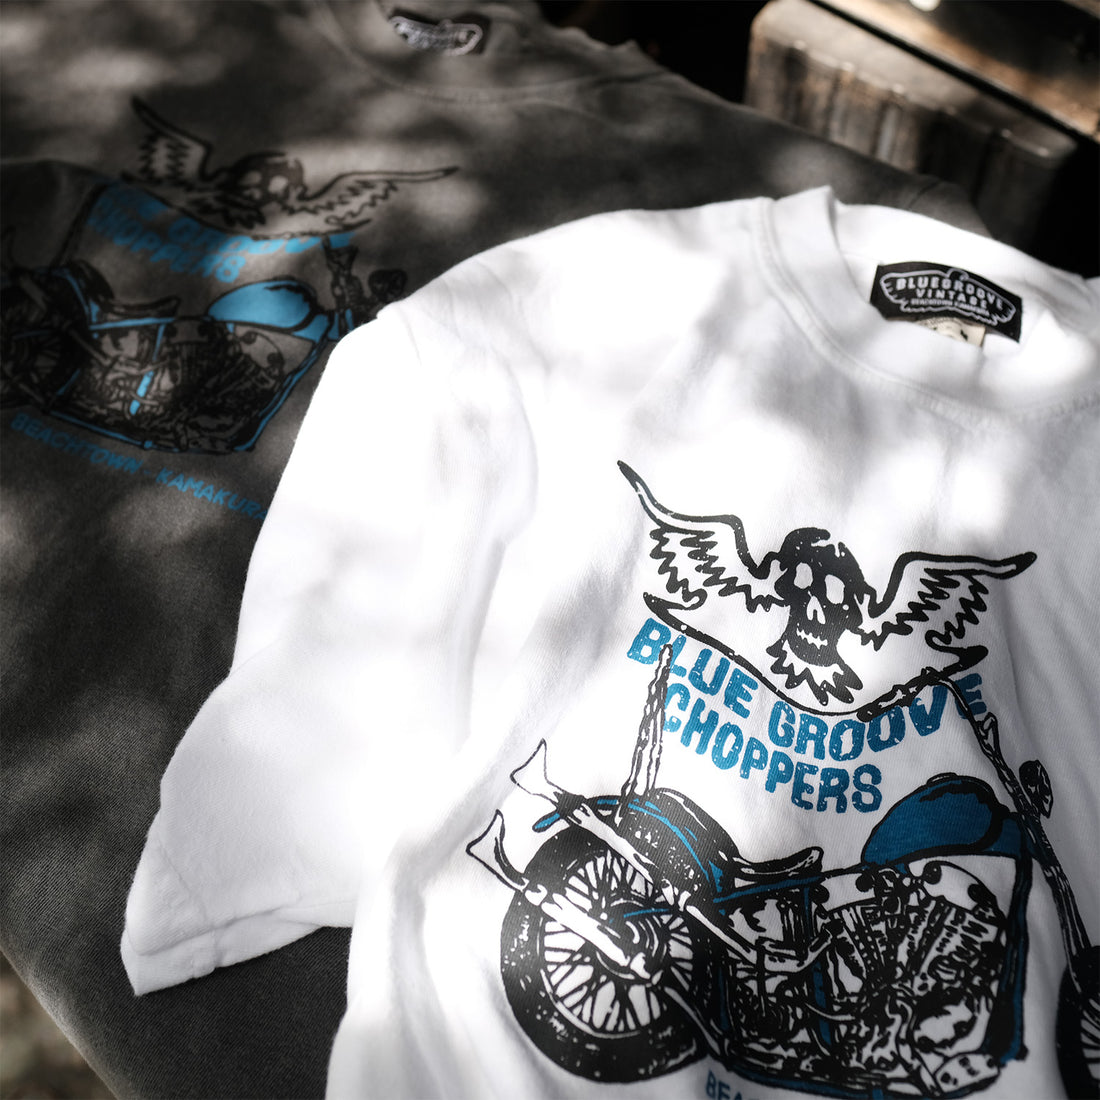 NEW RELEASE -BG CHOPPERS SKULL WING- NEW T-SHIRT 発売のお知らせ